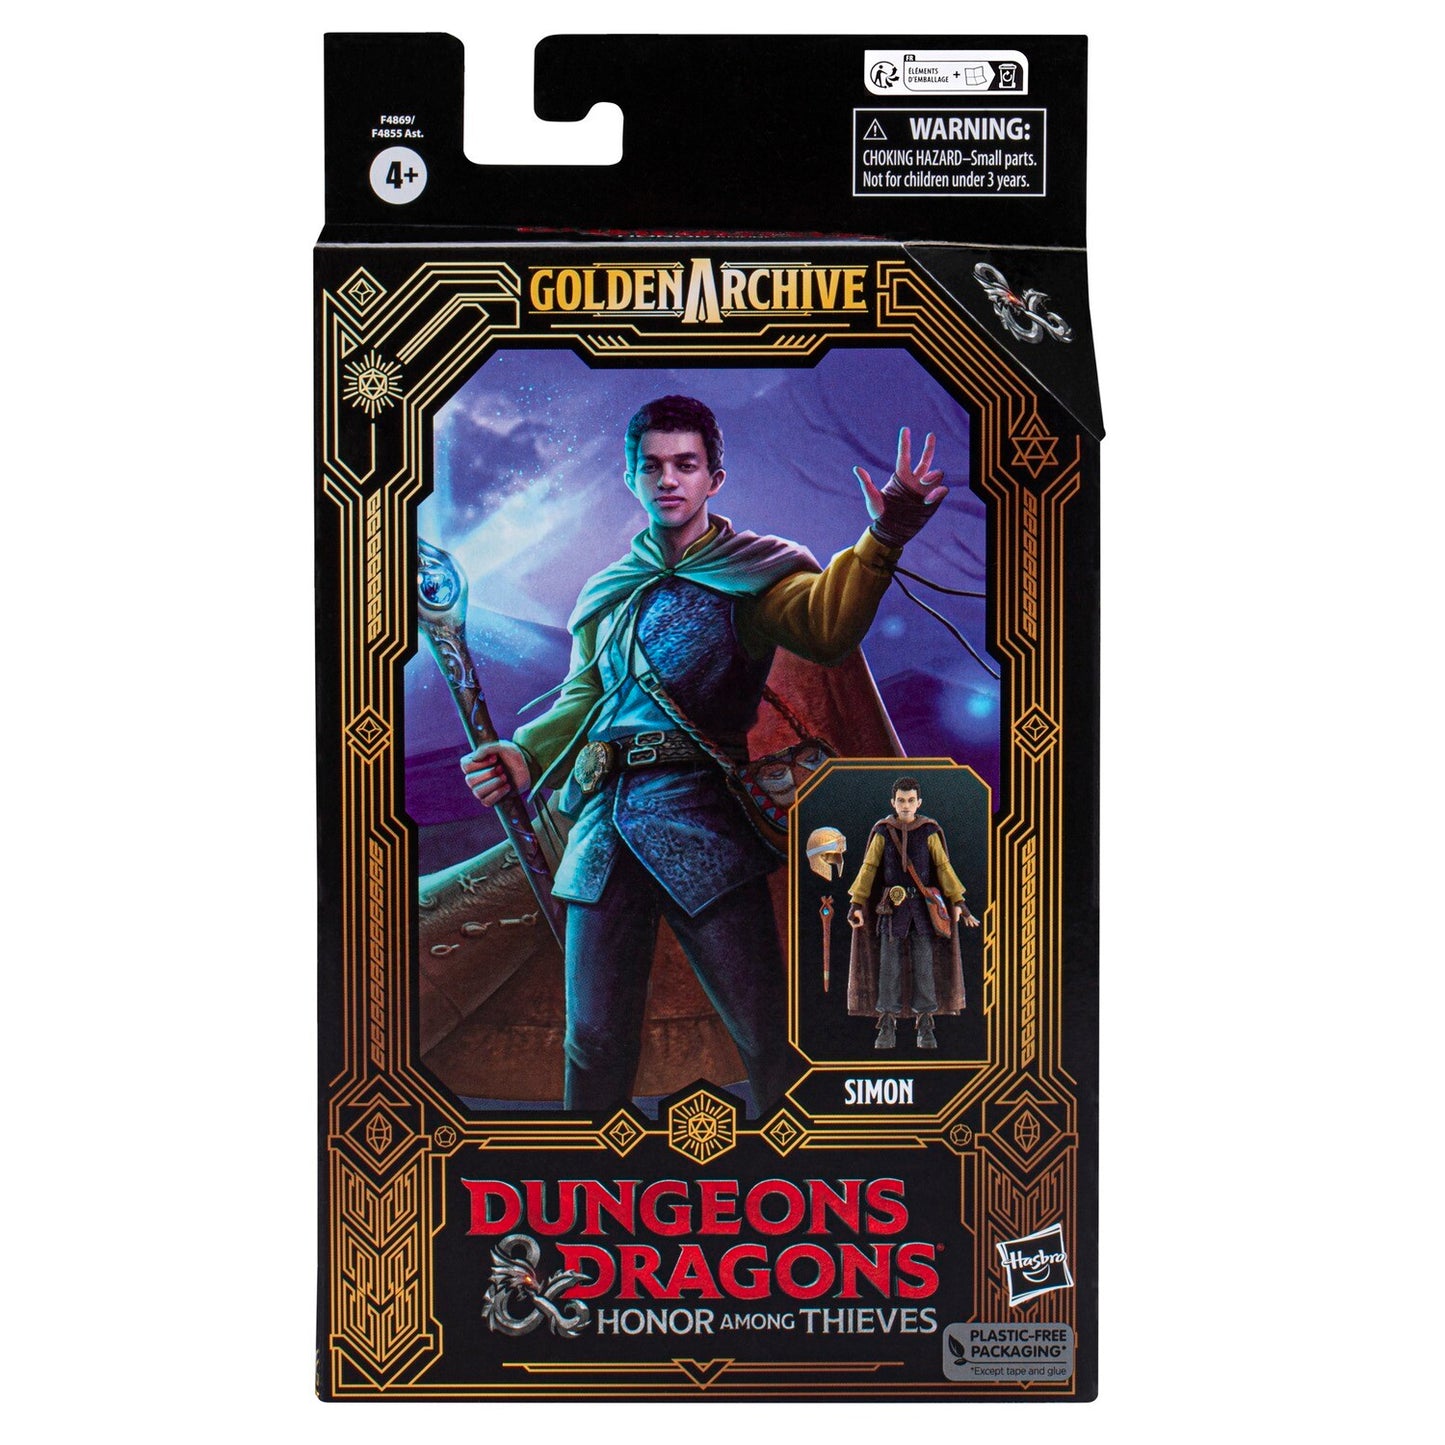 Dungeons & Dragons - Golden Archive - Simon